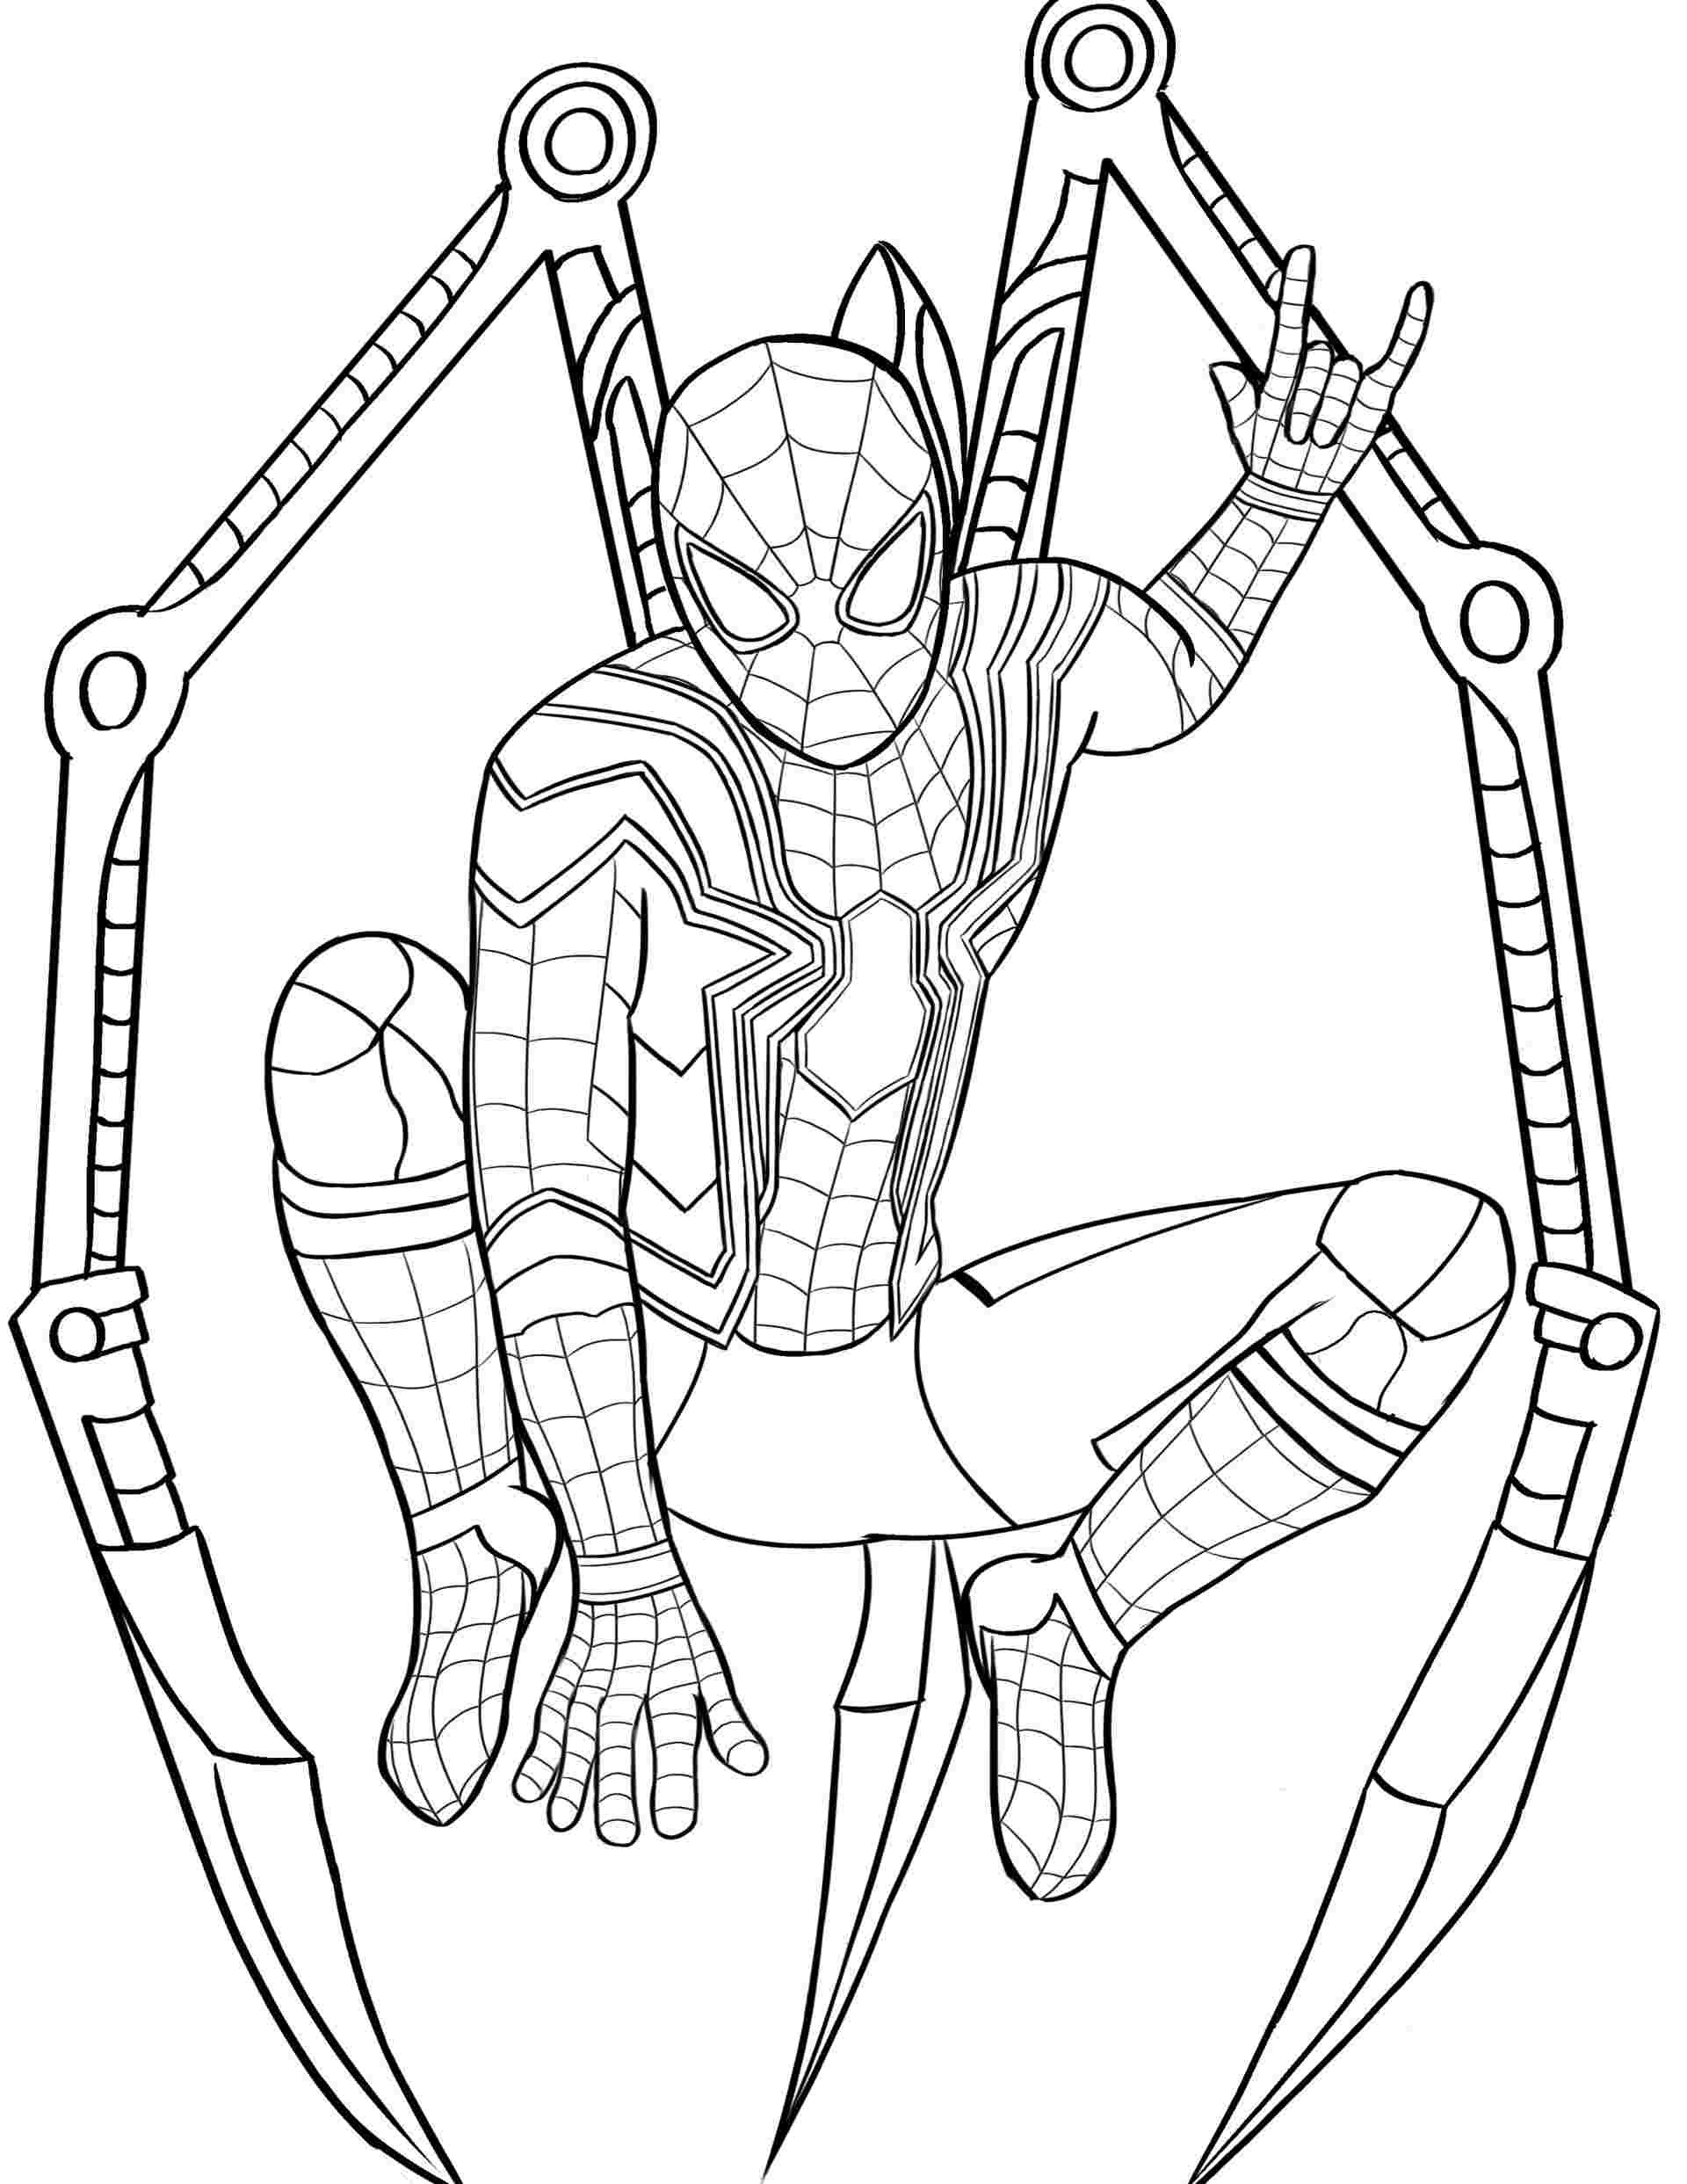 Spider Man Homecoming Coloring Pages   Coloring Home